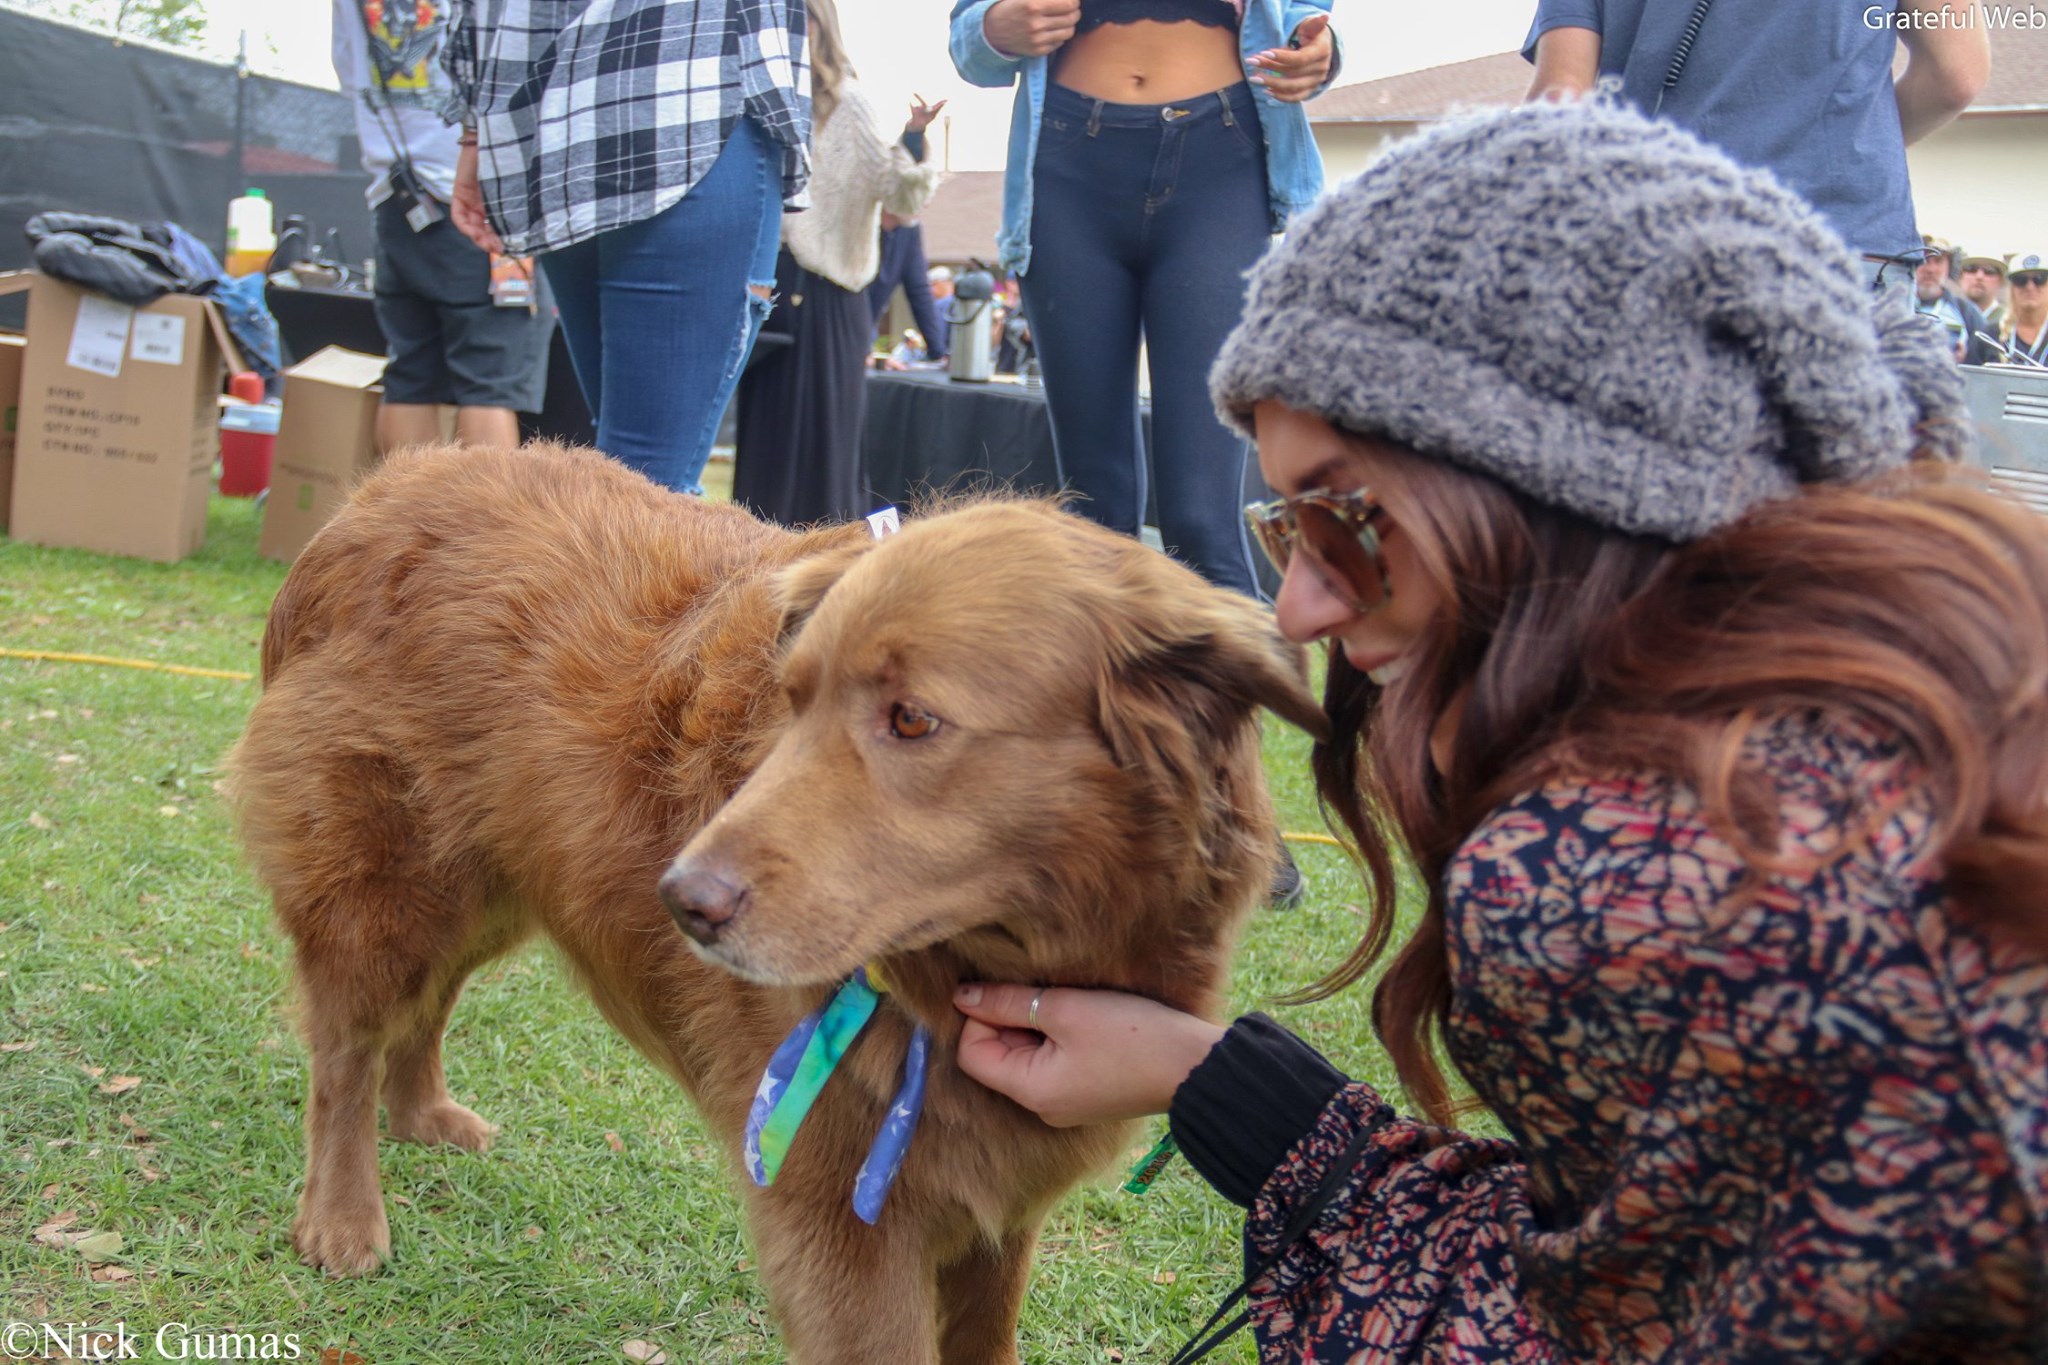 Cocoa the Tour Dog gets to meet some fans @ Cali Roots